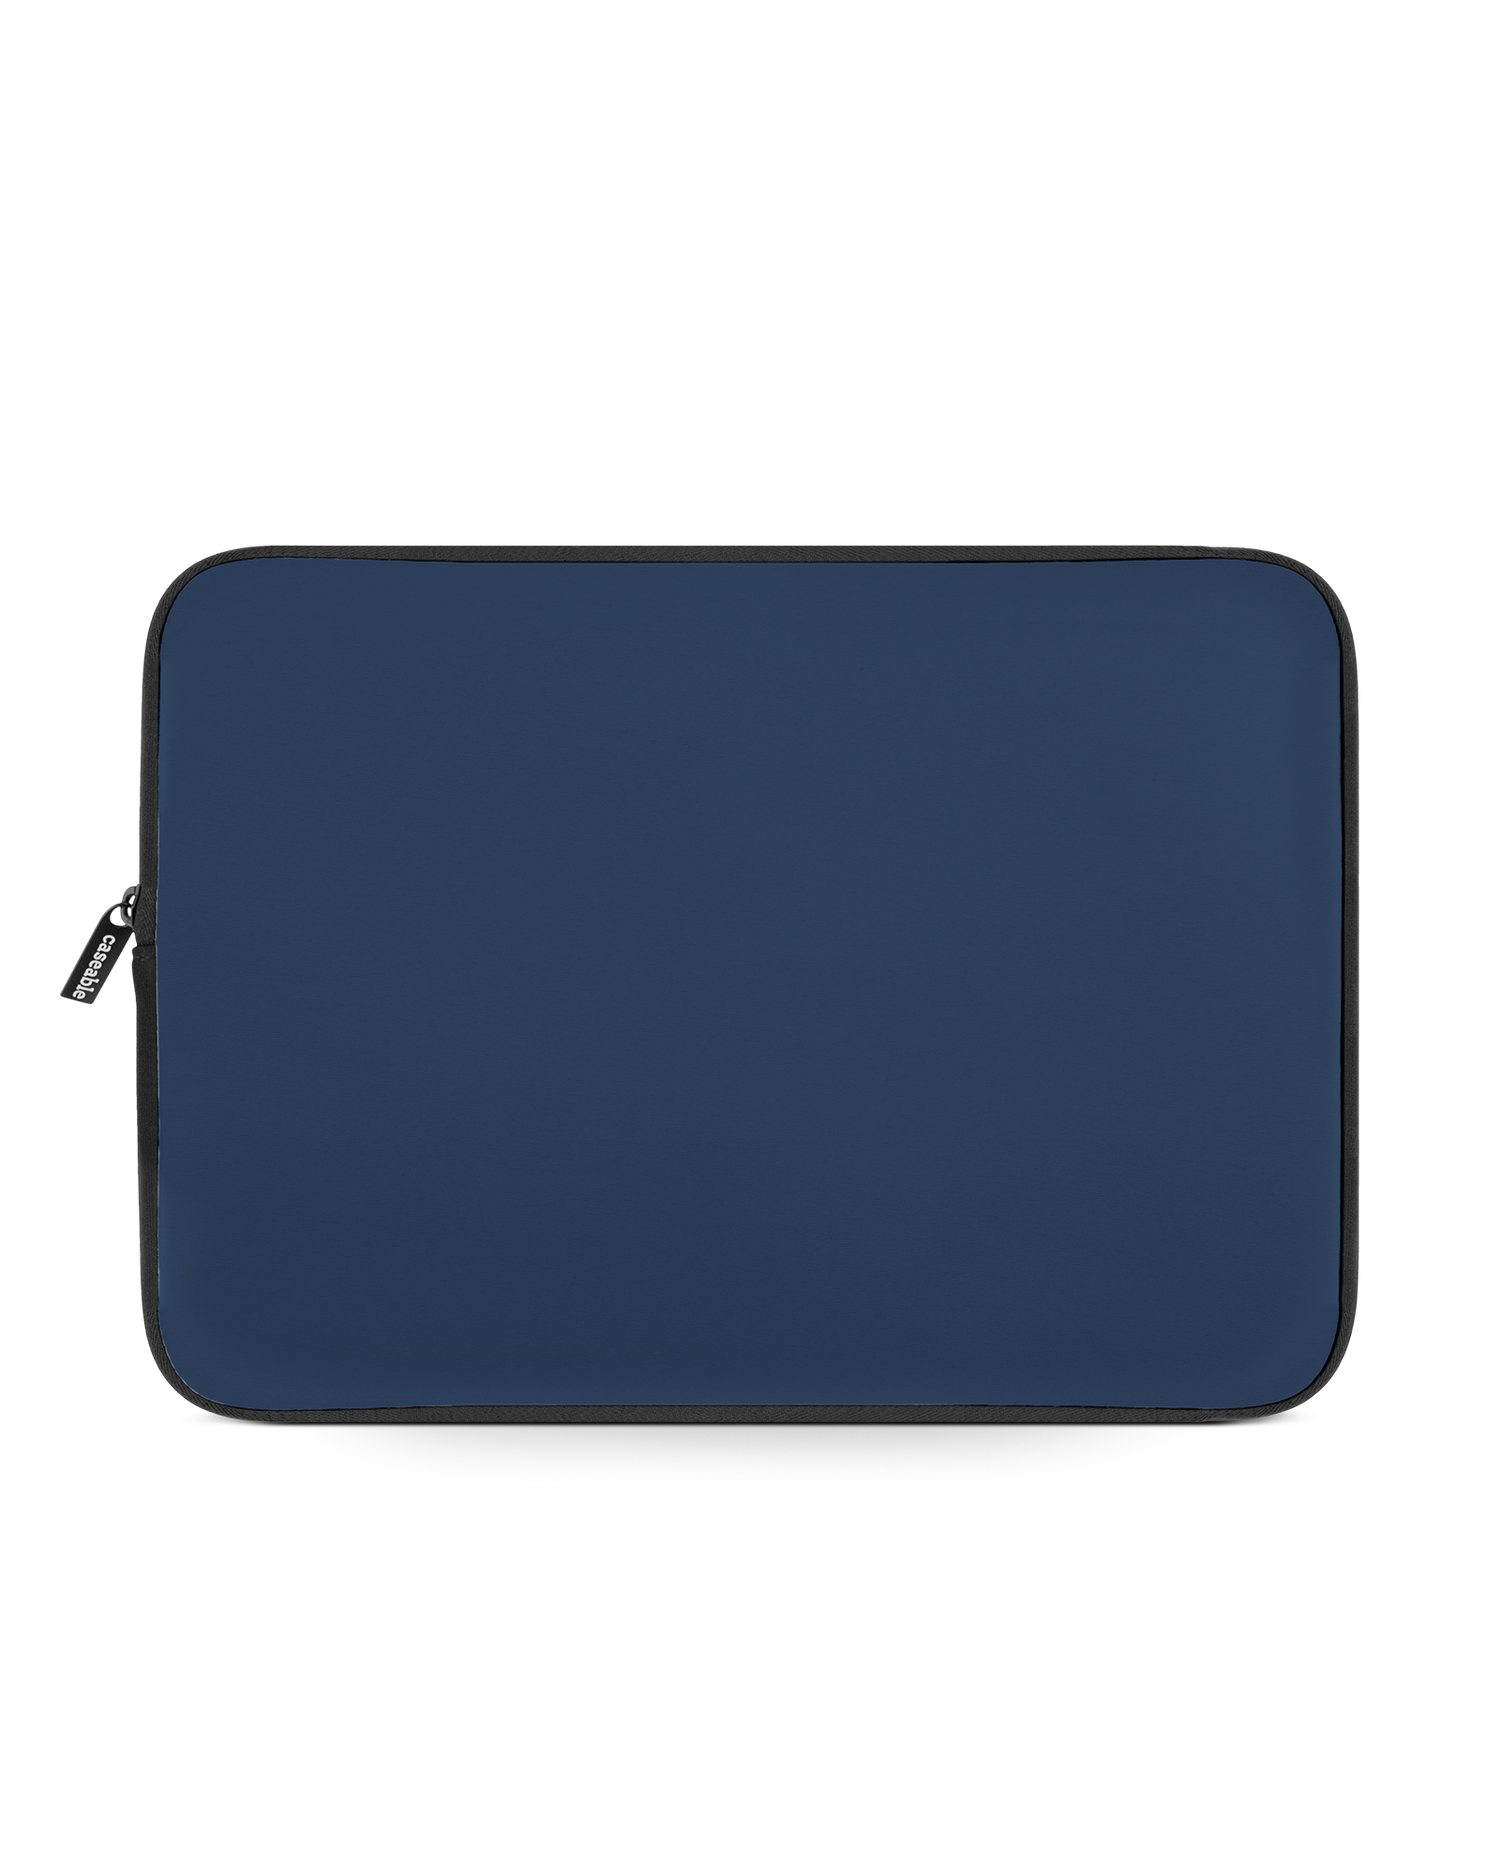 NAVY Laptop Case 13-14 inch: Front View